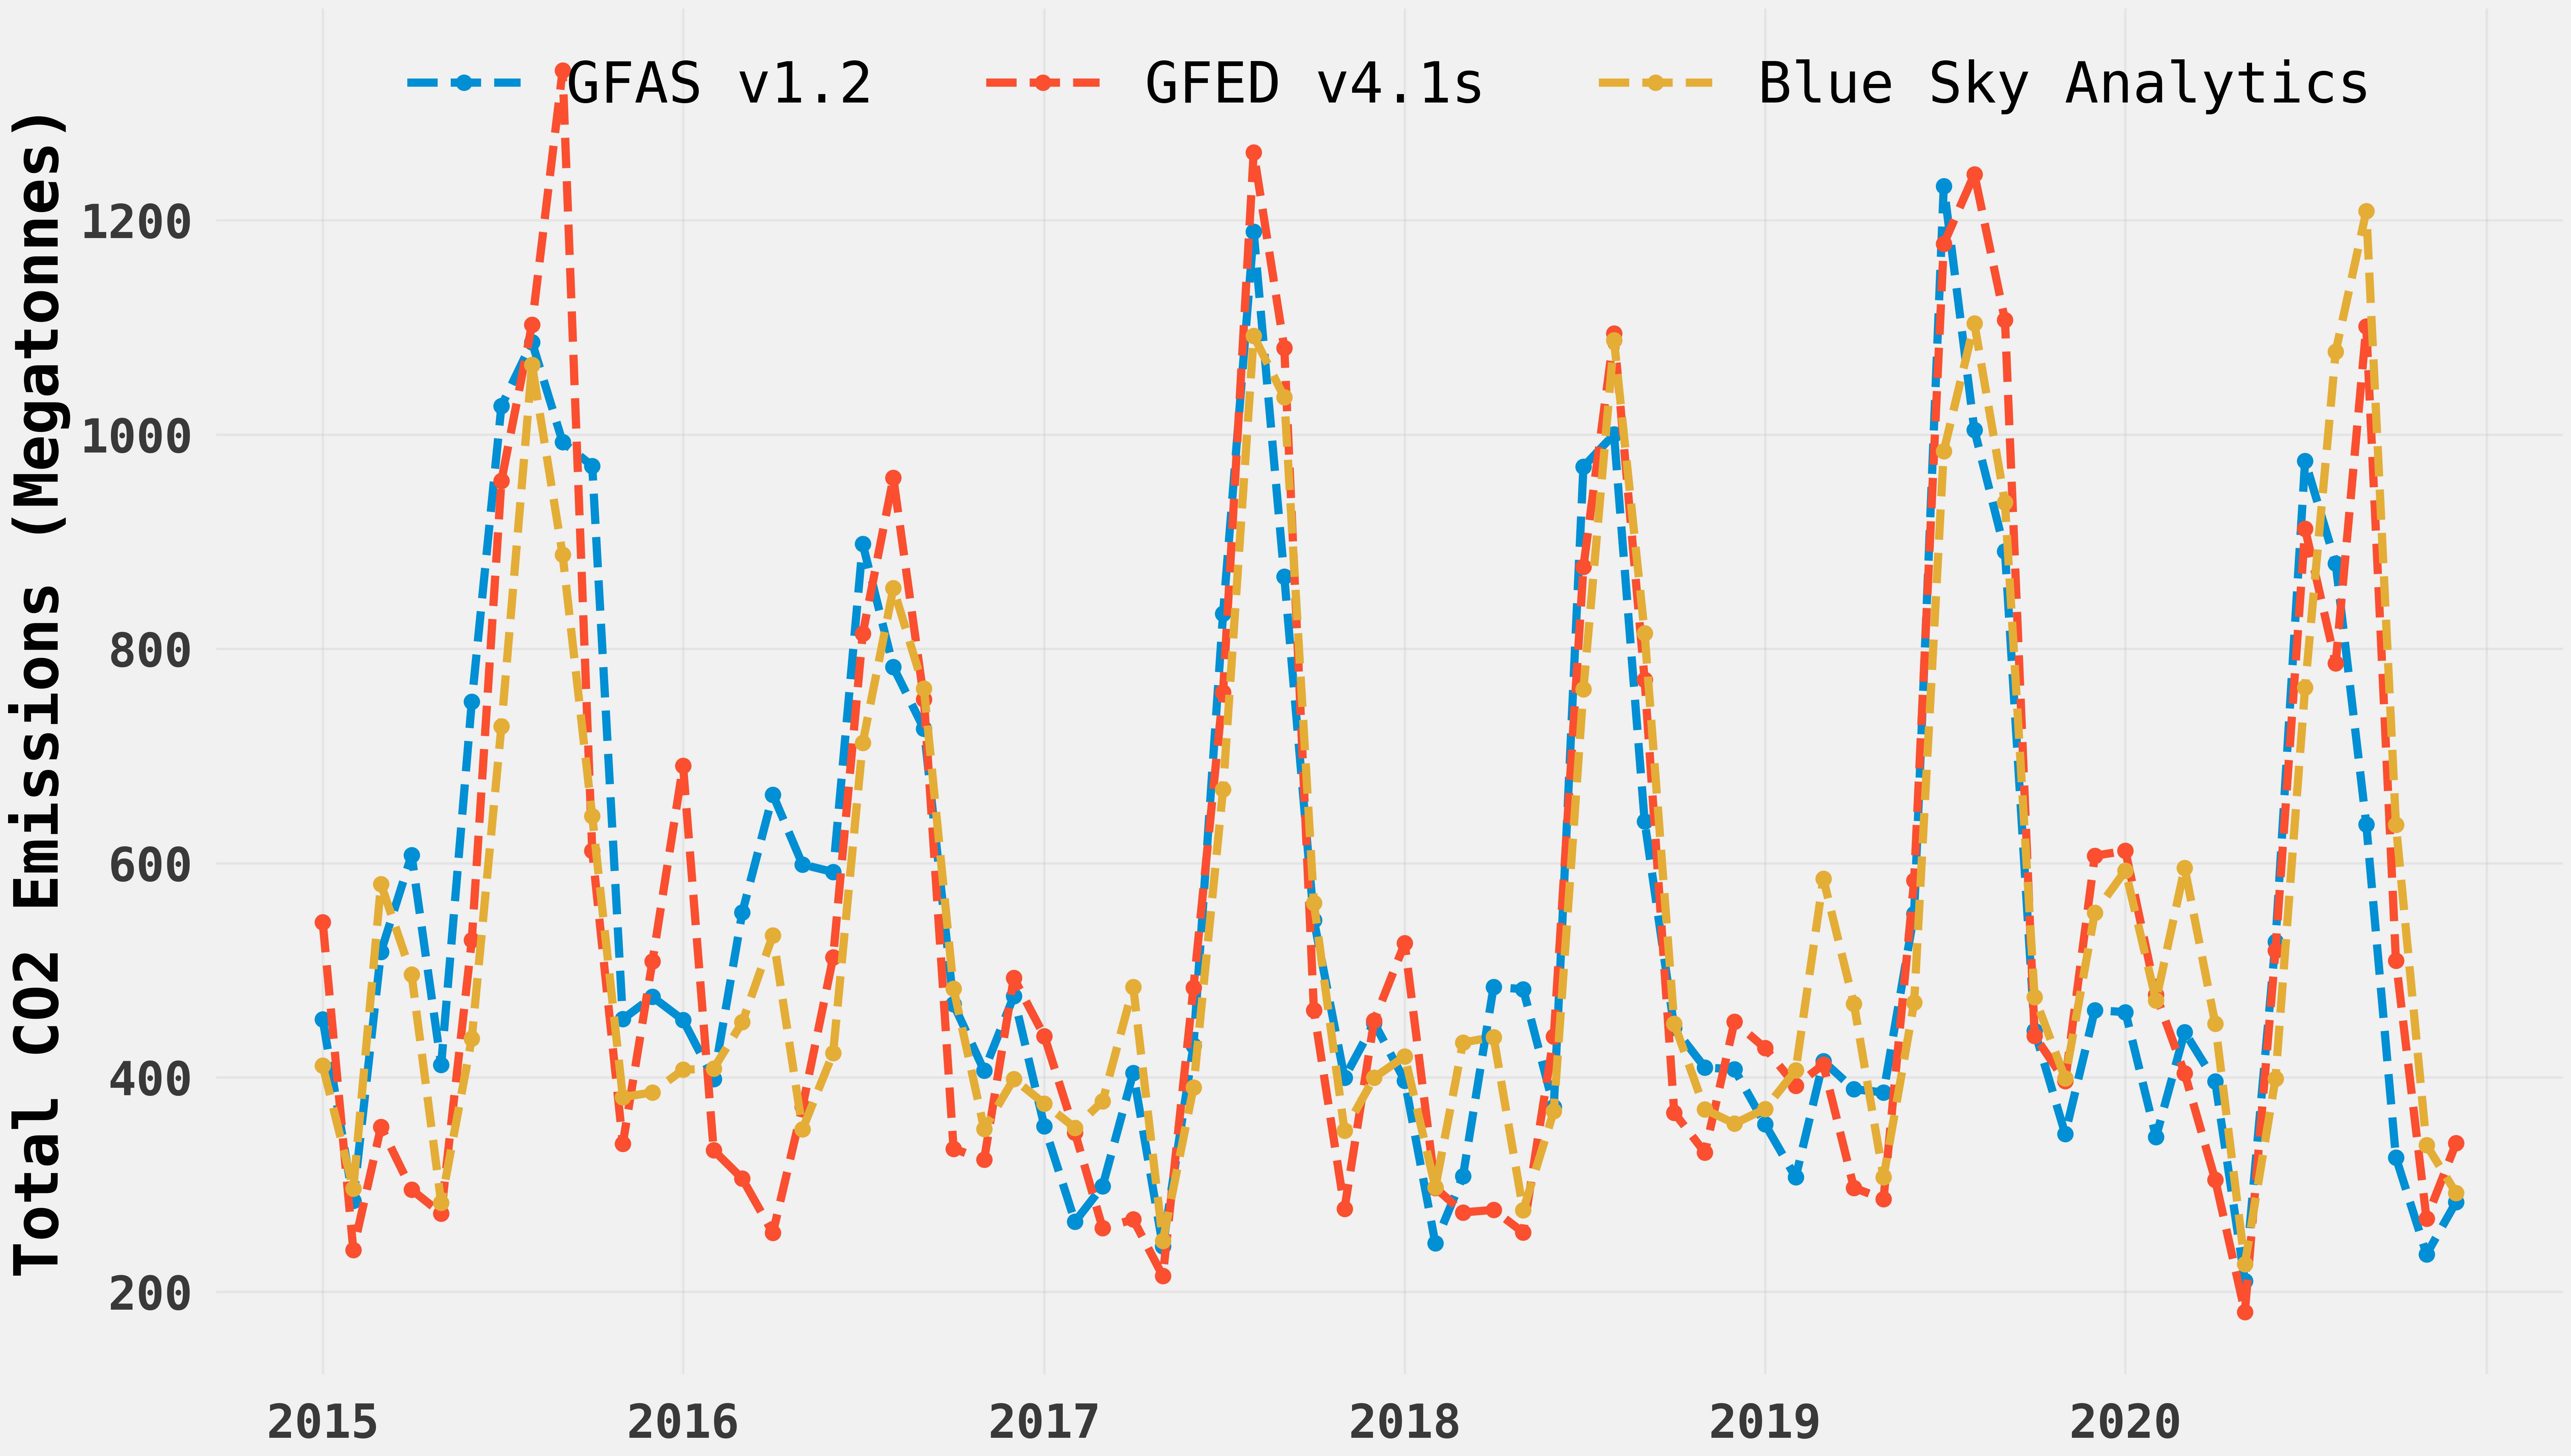 The graph displays the monthly carbon dioxide (CO2) emissions resulting from cropland fires between the years 2015 and 2020, as measured by the Global Fire Assimilation System (GFAS) (shown in blue), the Global Fire Emissions Database (GFED) (shown in orange), and Blue Sky Analytics (shown in yellow).  The x-axis indicates January 1 as the starting point for each year.